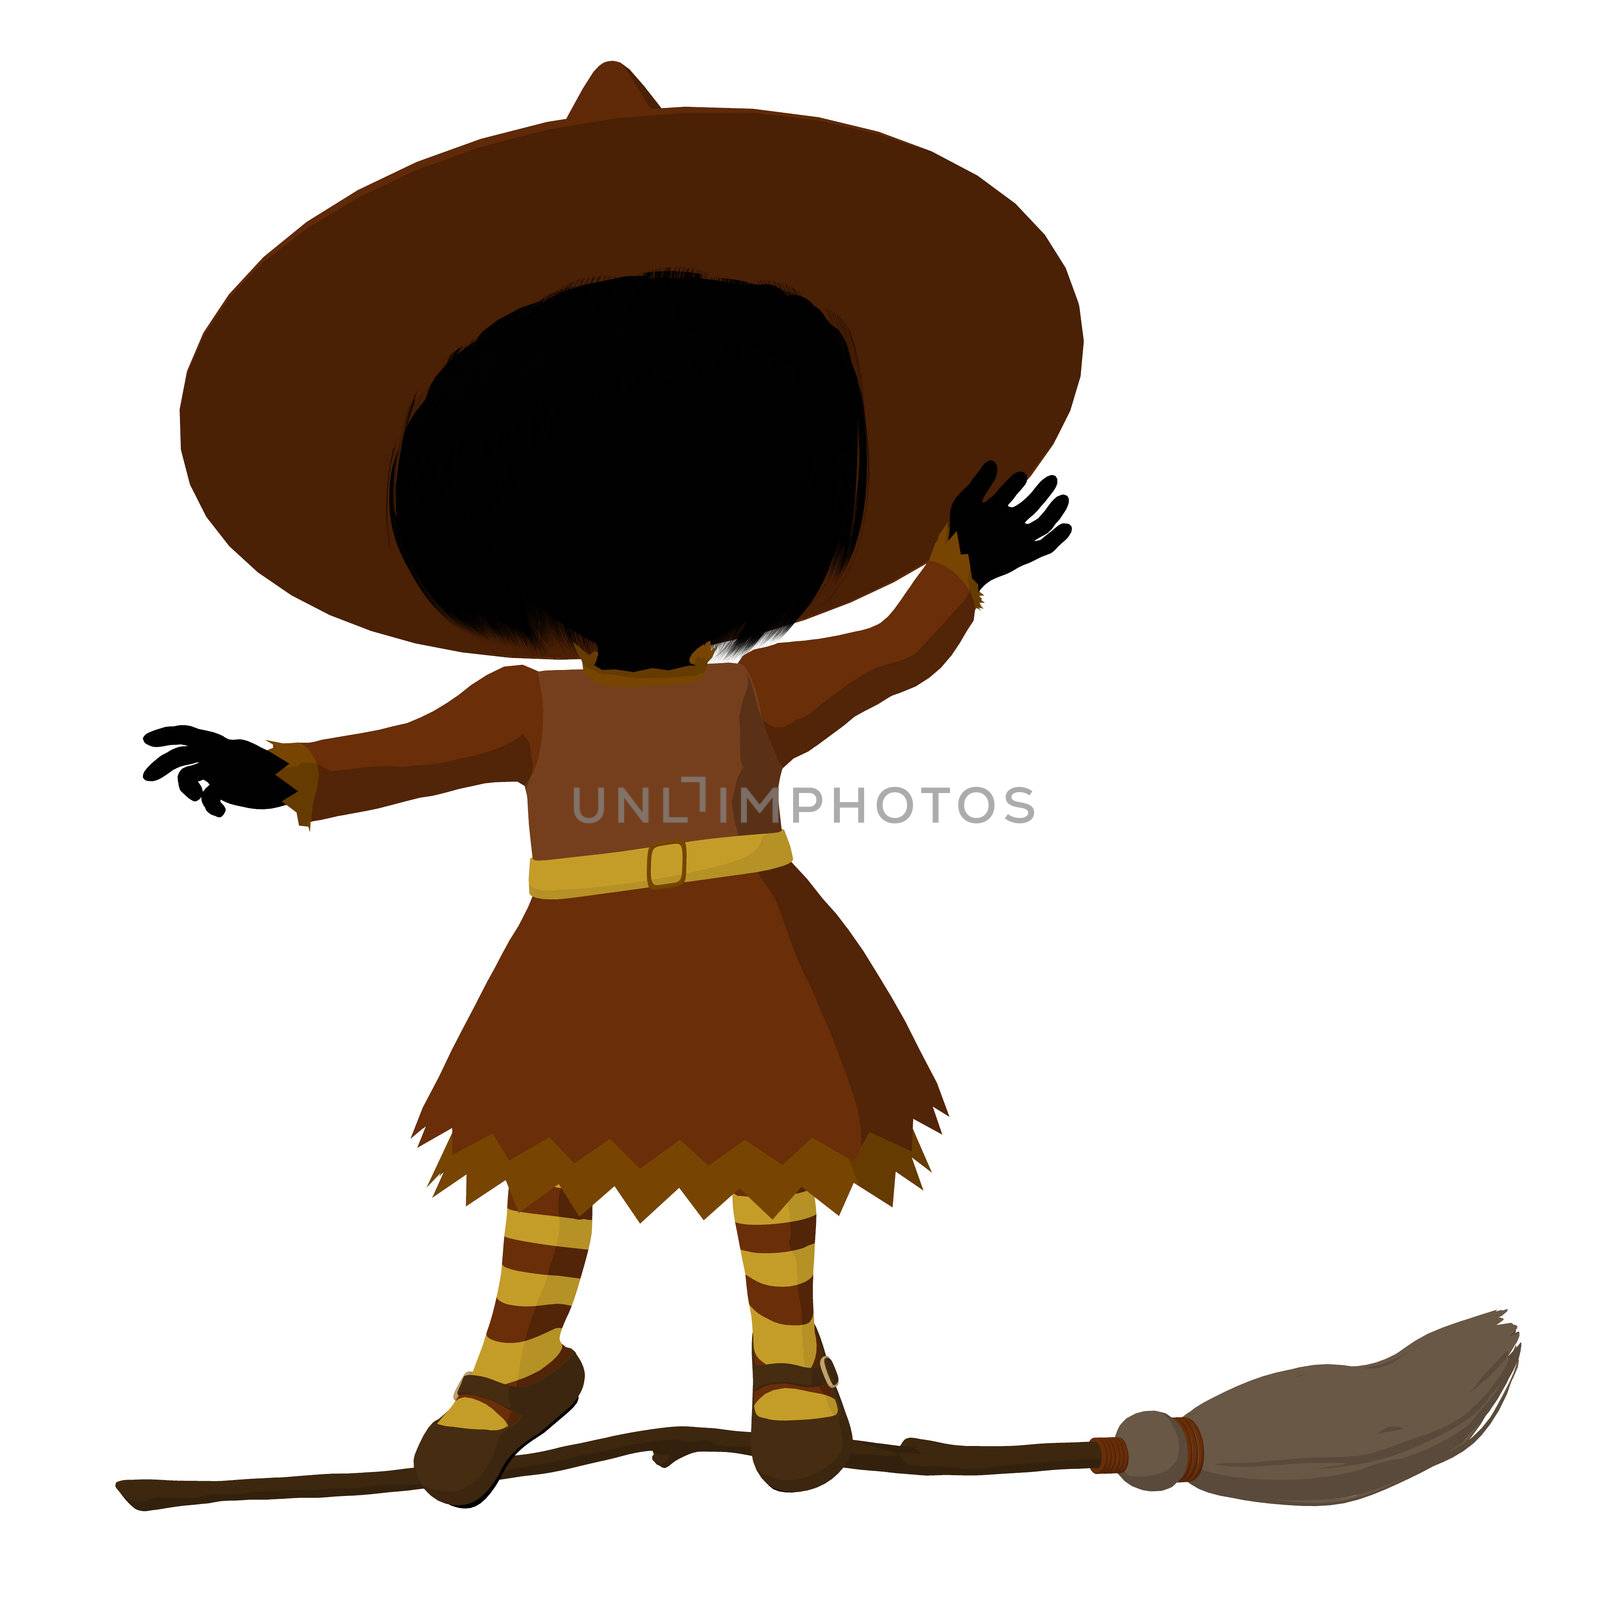 Little witch illustration silhouette on a white background